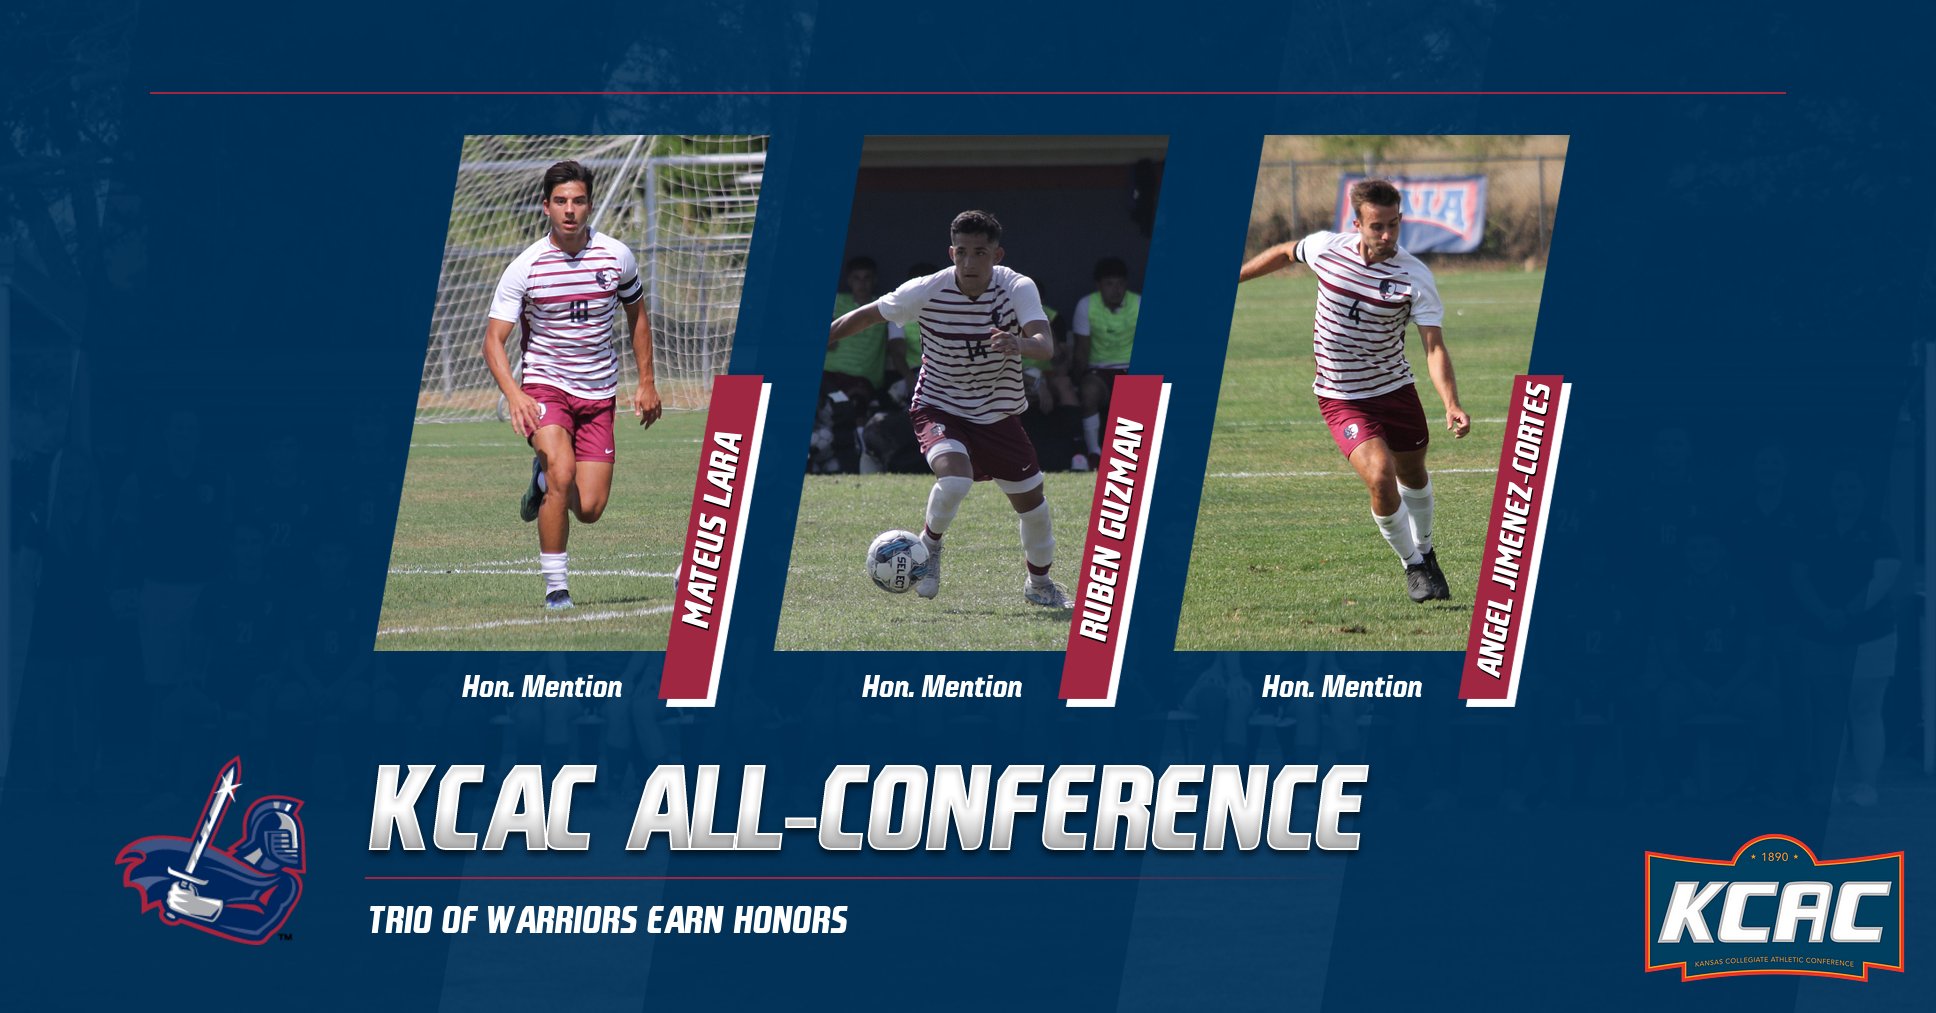 Trio of Warriors Earn KCAC All-Conference Honors